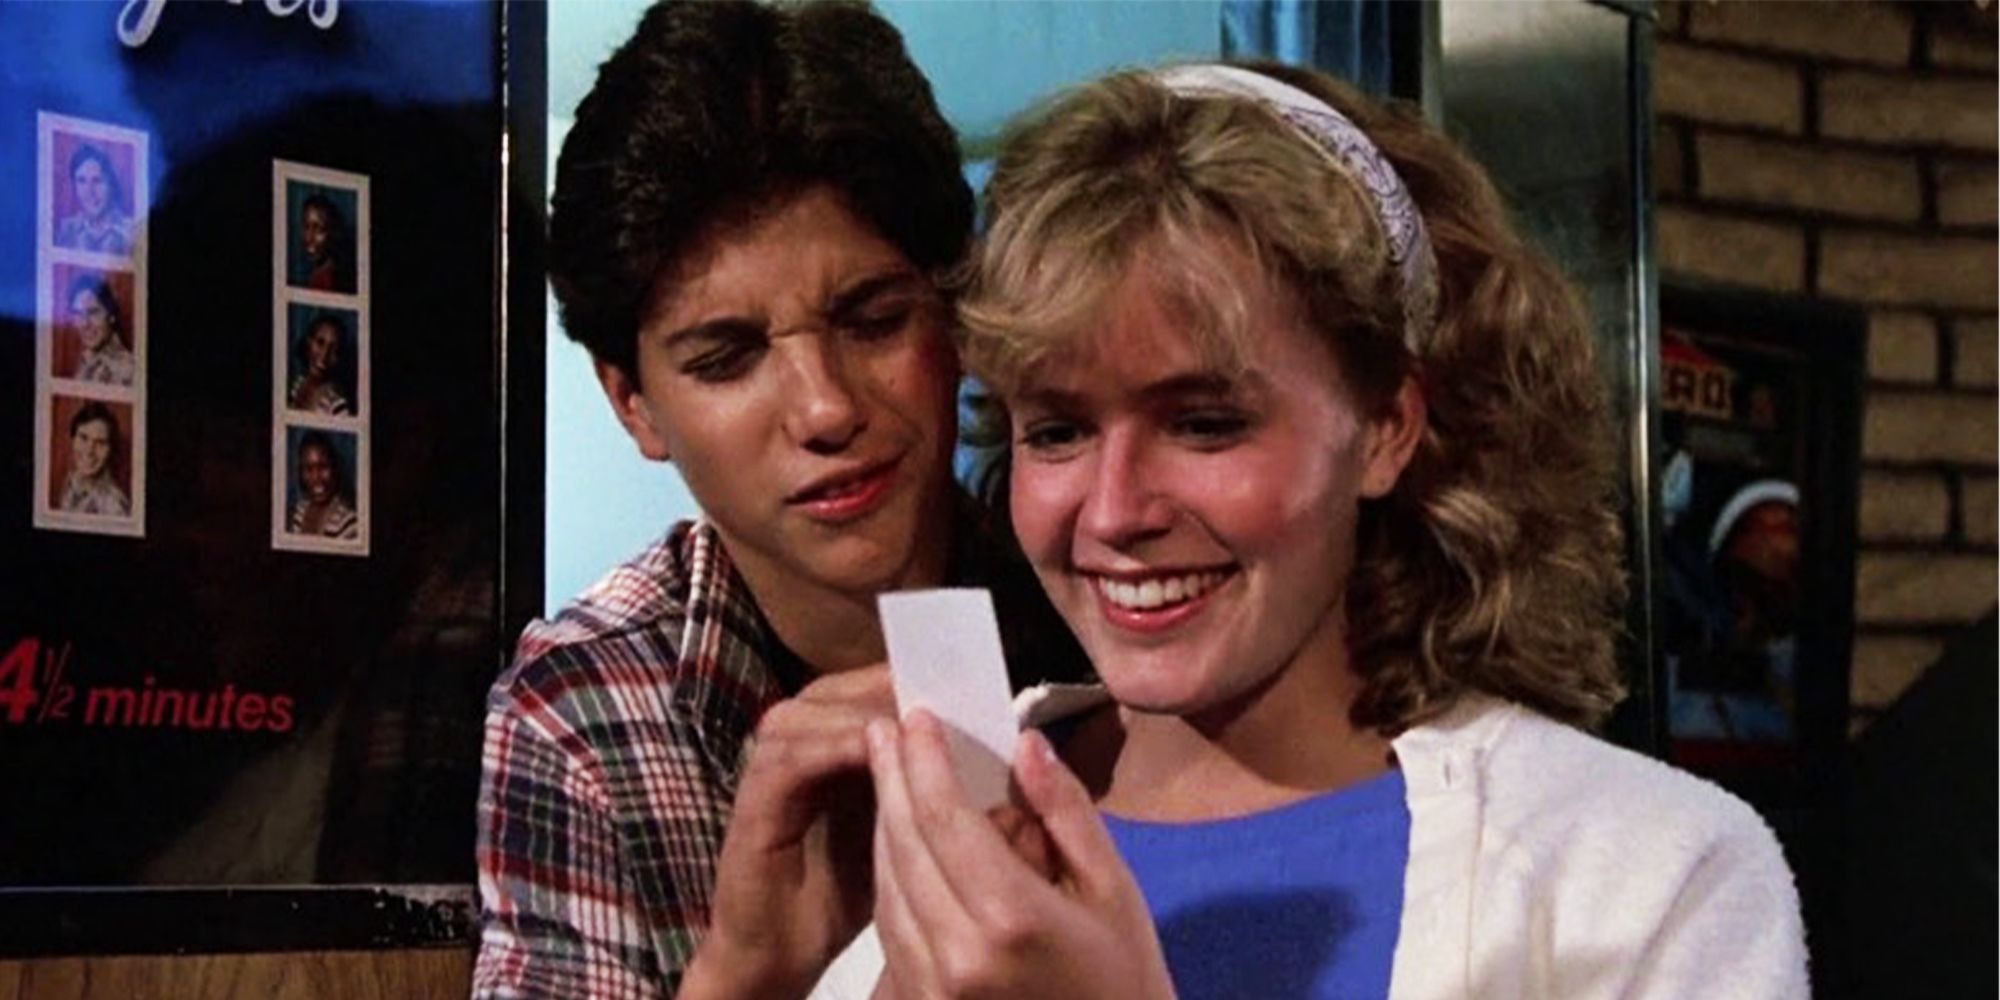 Ralph Macchio's Daniel LaRusso shares a silly moment with Elisabeth Shue's Ali Mills in The Karate Kid